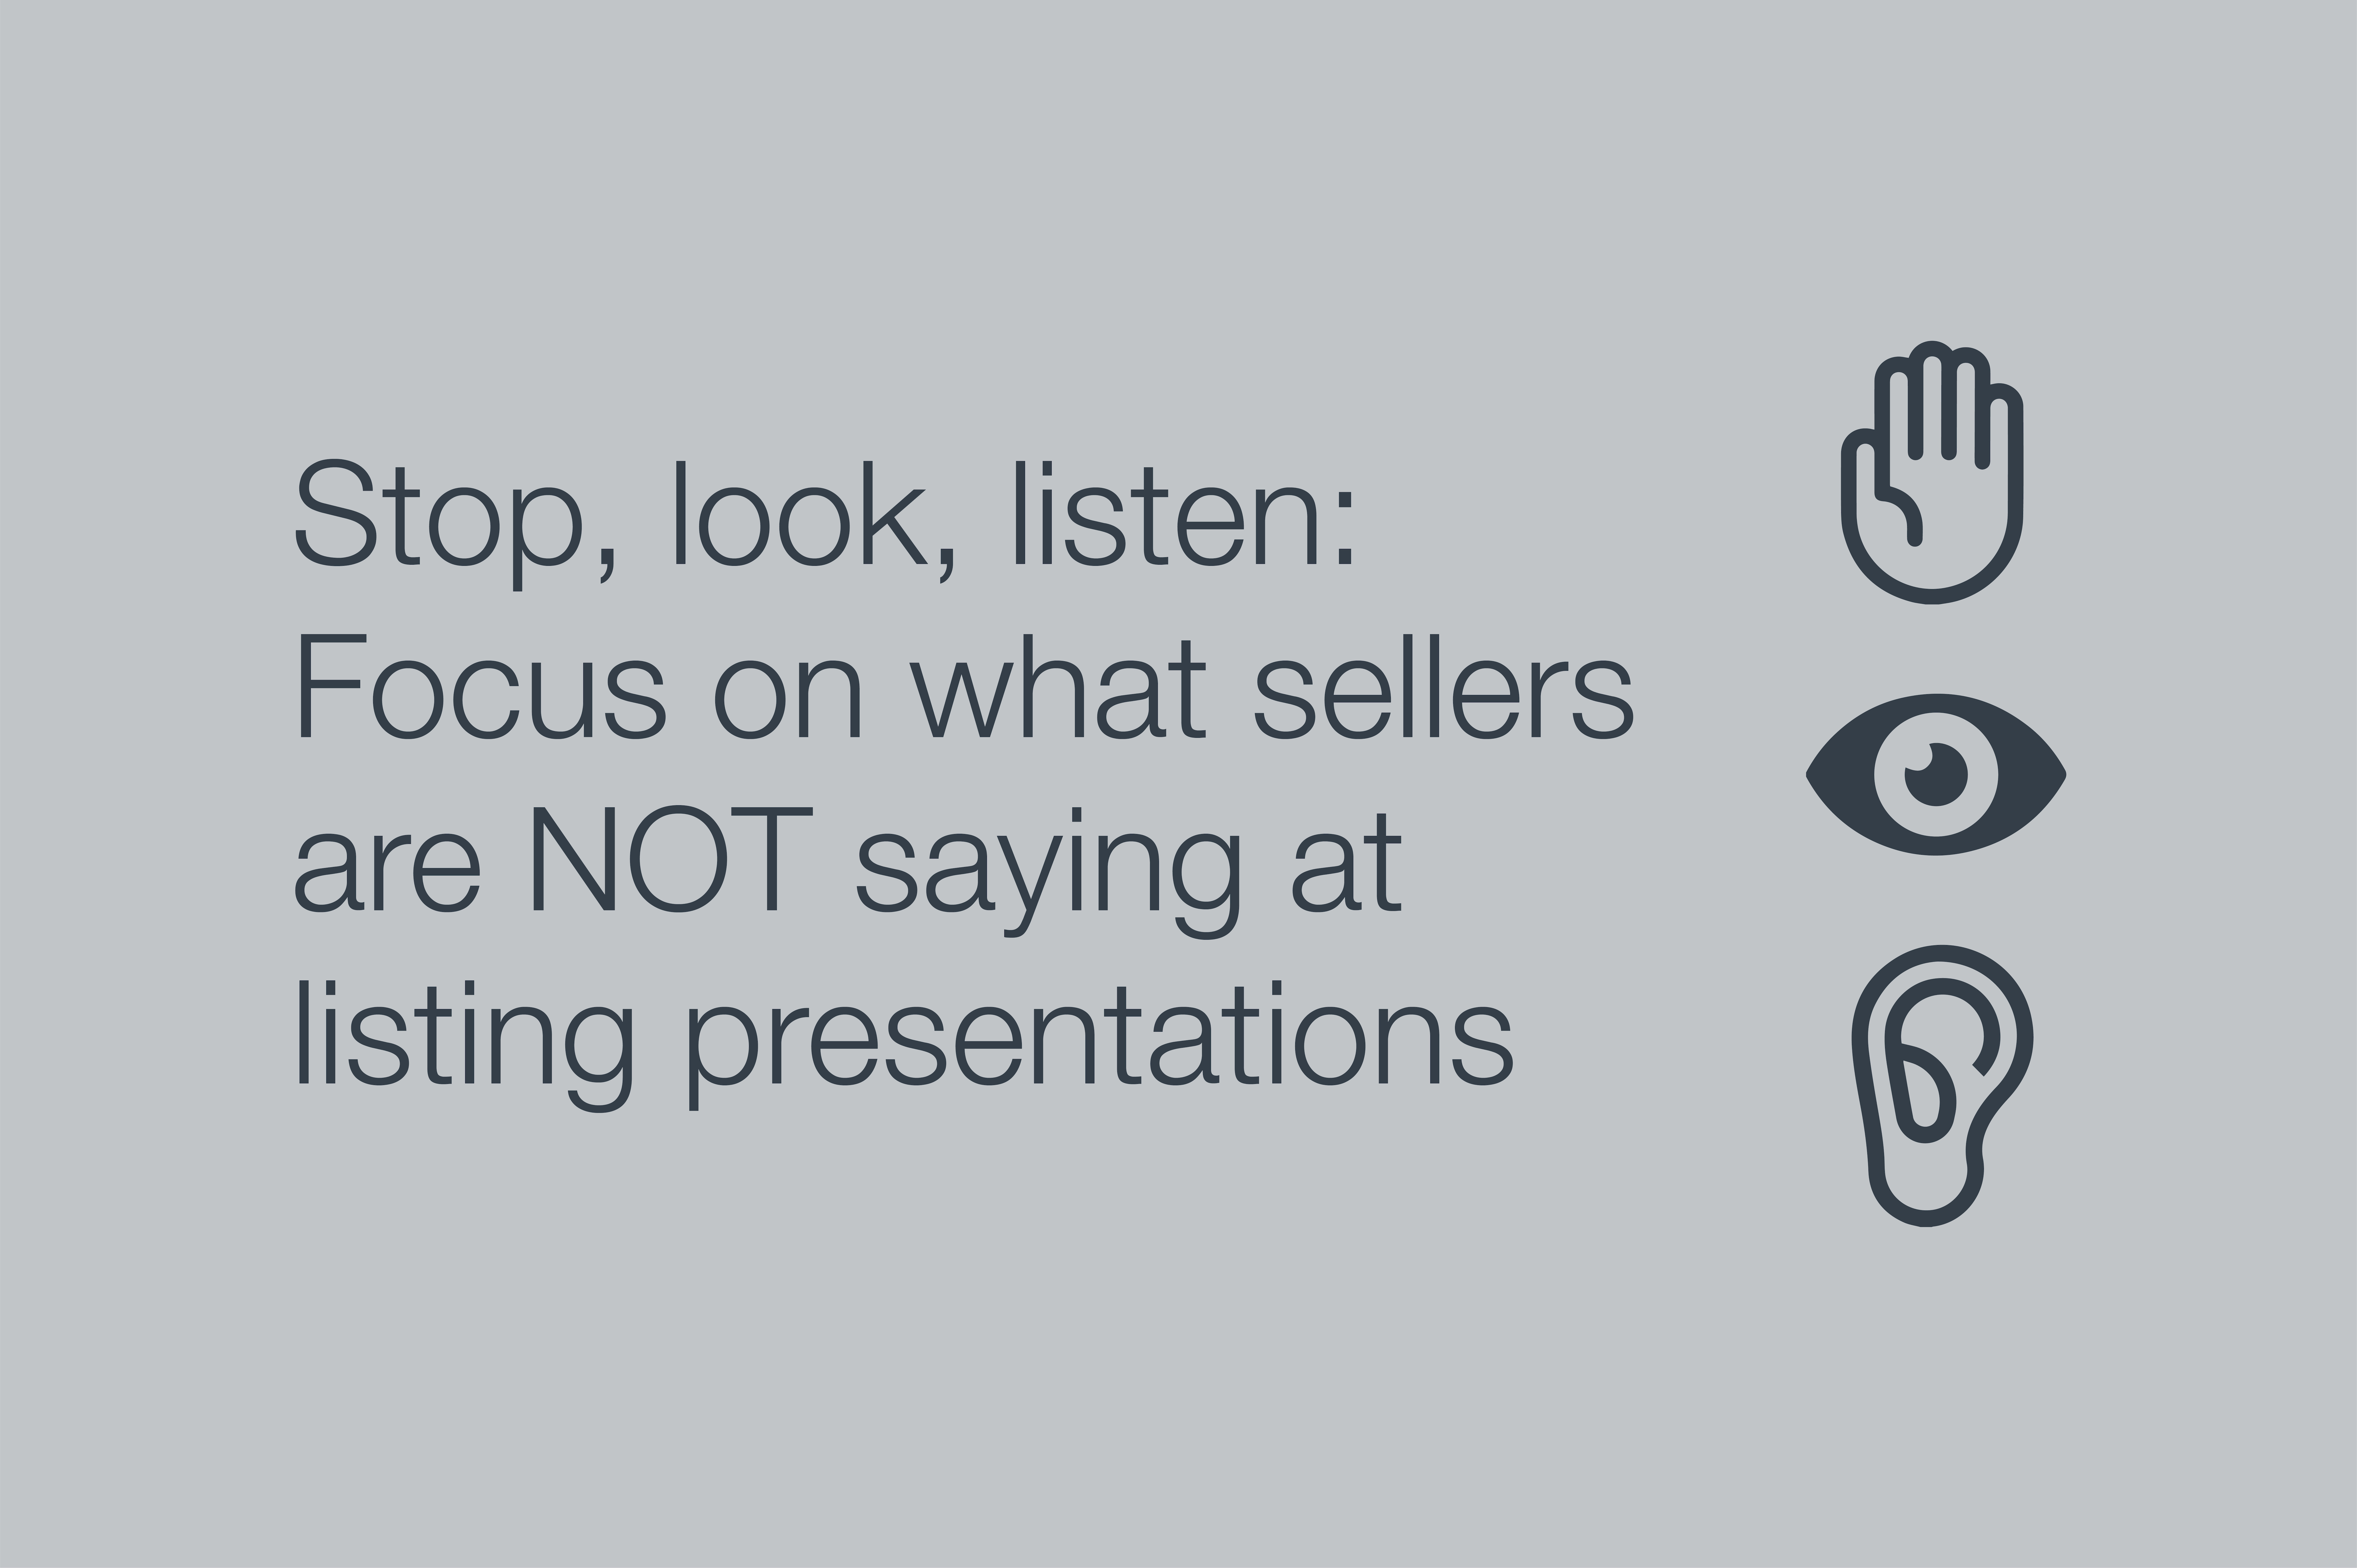 Stop, look, listen: Focus on what sellers are NOT saying at listing presentations